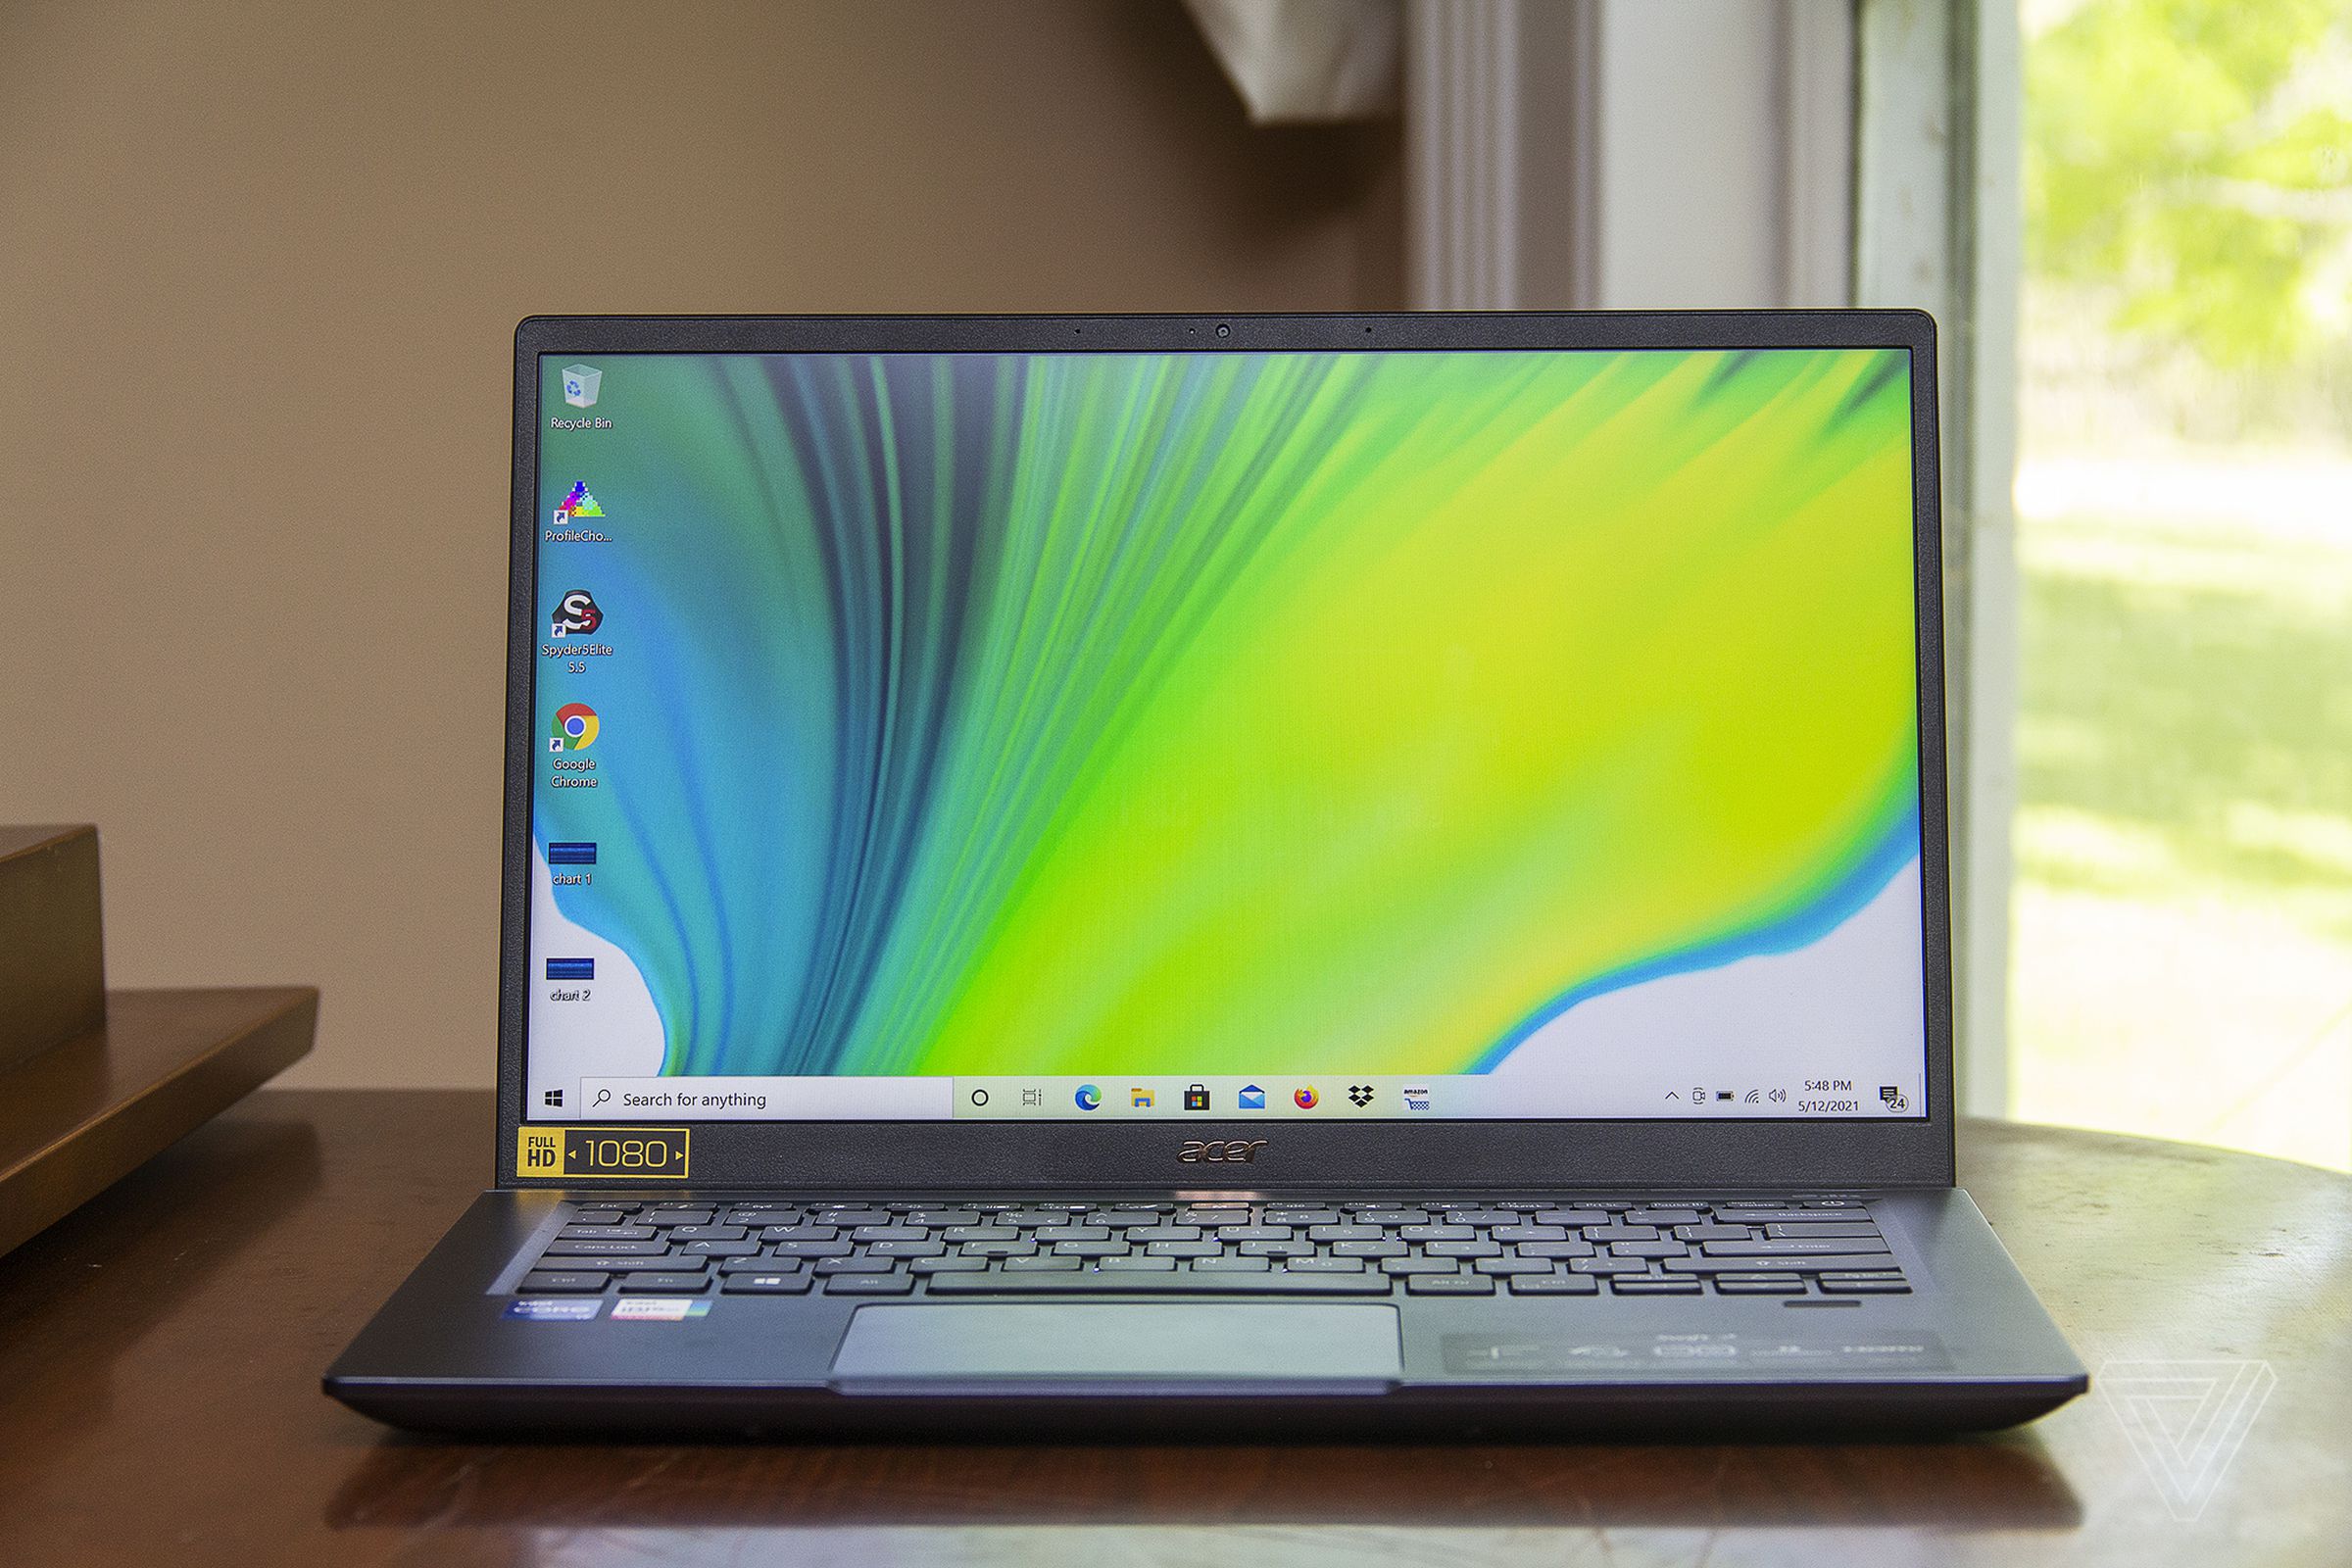 The Acer Swift 3X open on a piano seen from the front. The screen displays a blue, green, and white gradient.